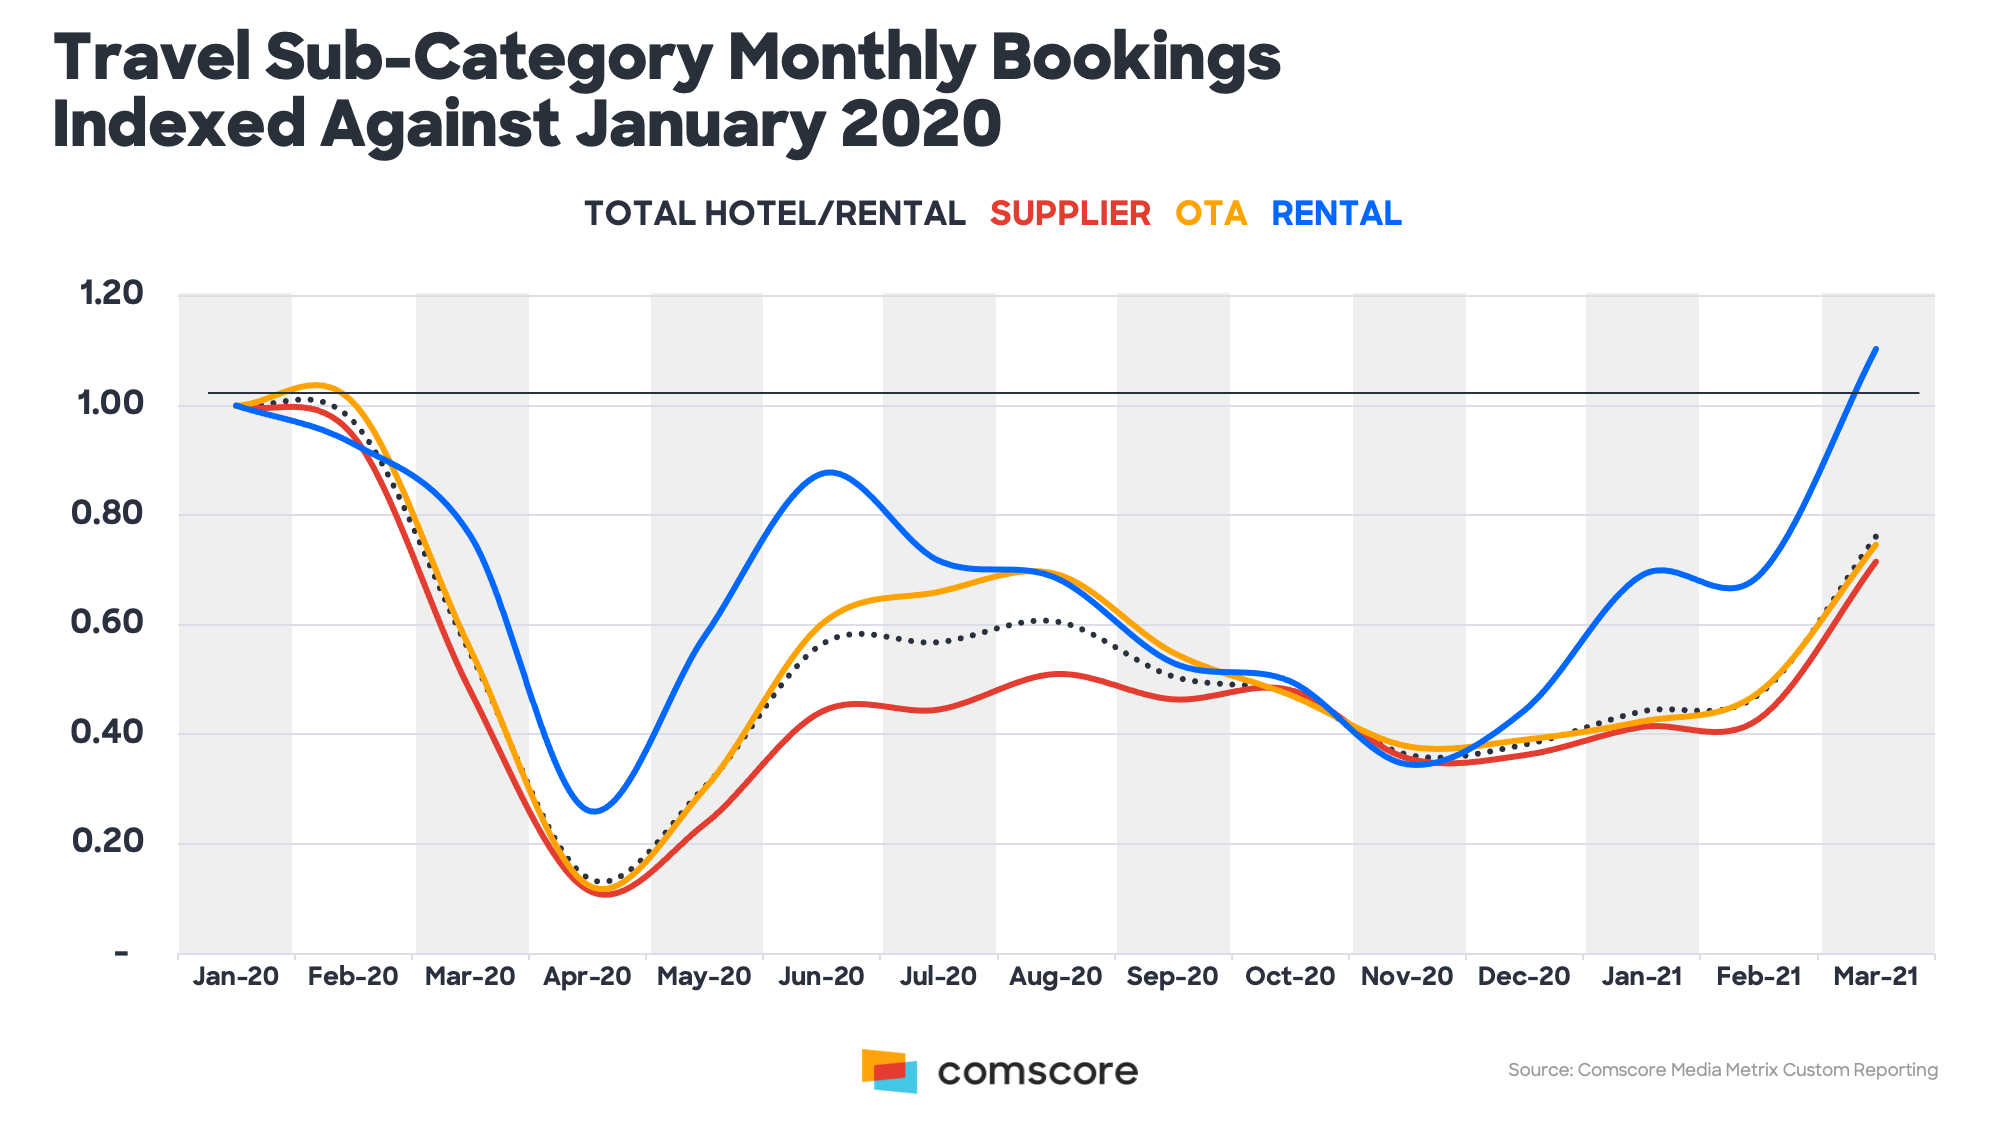 Travel Sub-Category Monthly Bookings Indexed Against January 2020